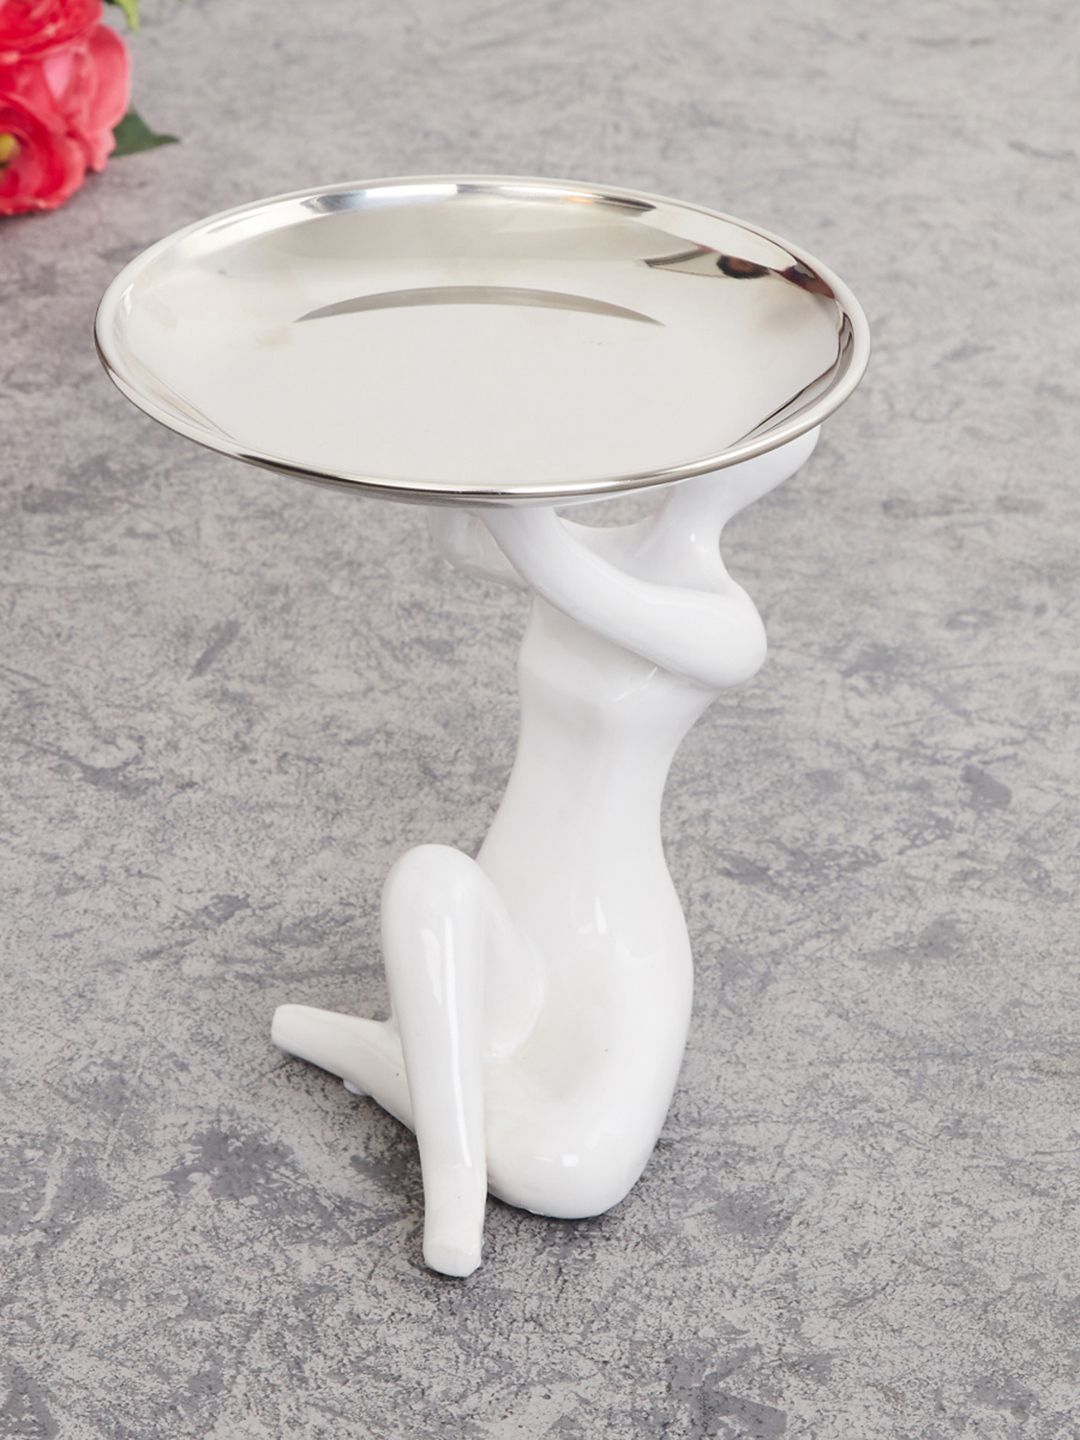 Home Centre White & Silver-Toned Solid Ceramic Lady Plate in Hand Showpiece Price in India